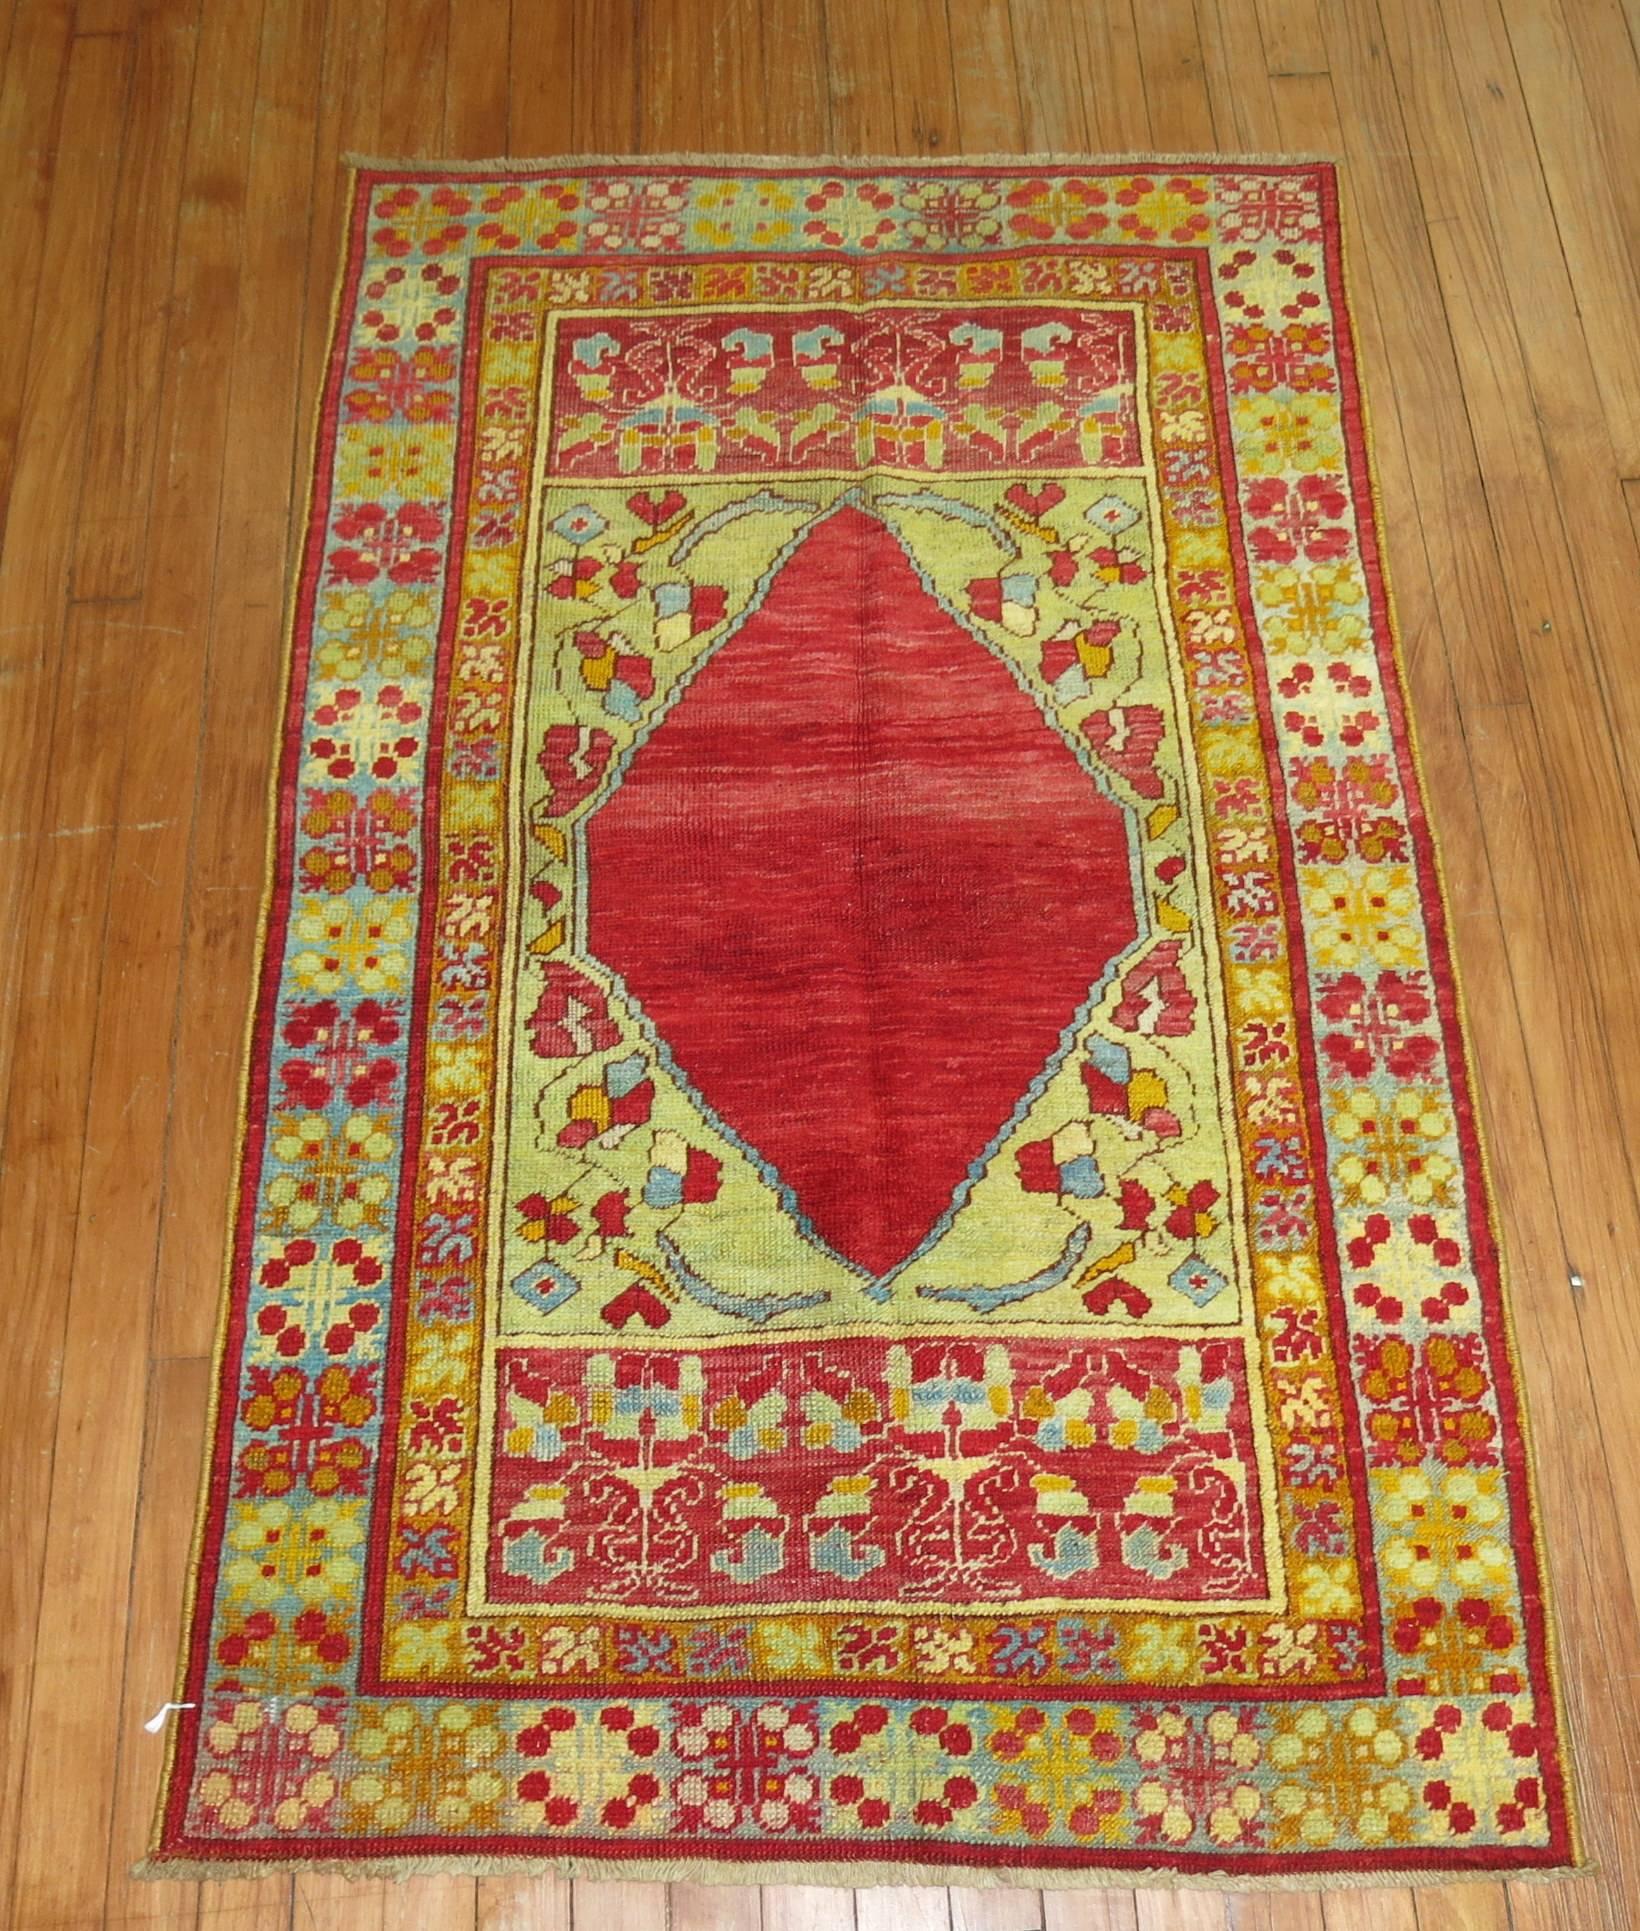 An early 20th century Turkish Melas rug featuring bright intense colors predominantly in cherry red and lime green.

Turkish rugs produced in the district of Melas are unique in their style, colors and composition. They are usually woven very